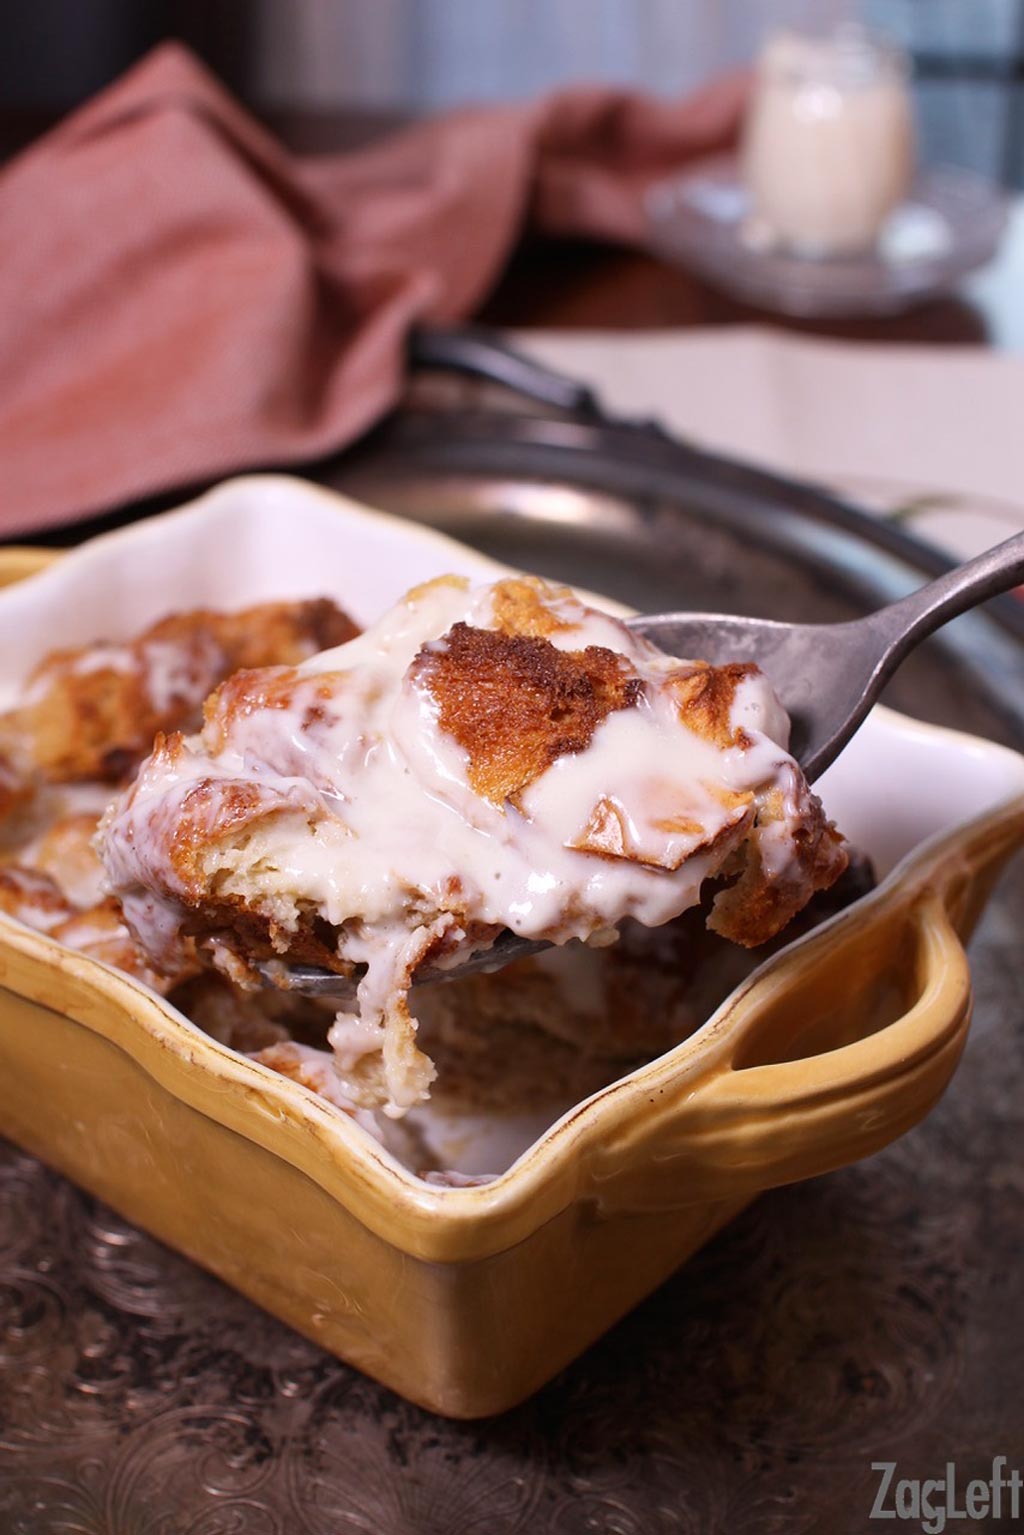 A spoonful of bread pudding with whiskey sauce from baking dish.